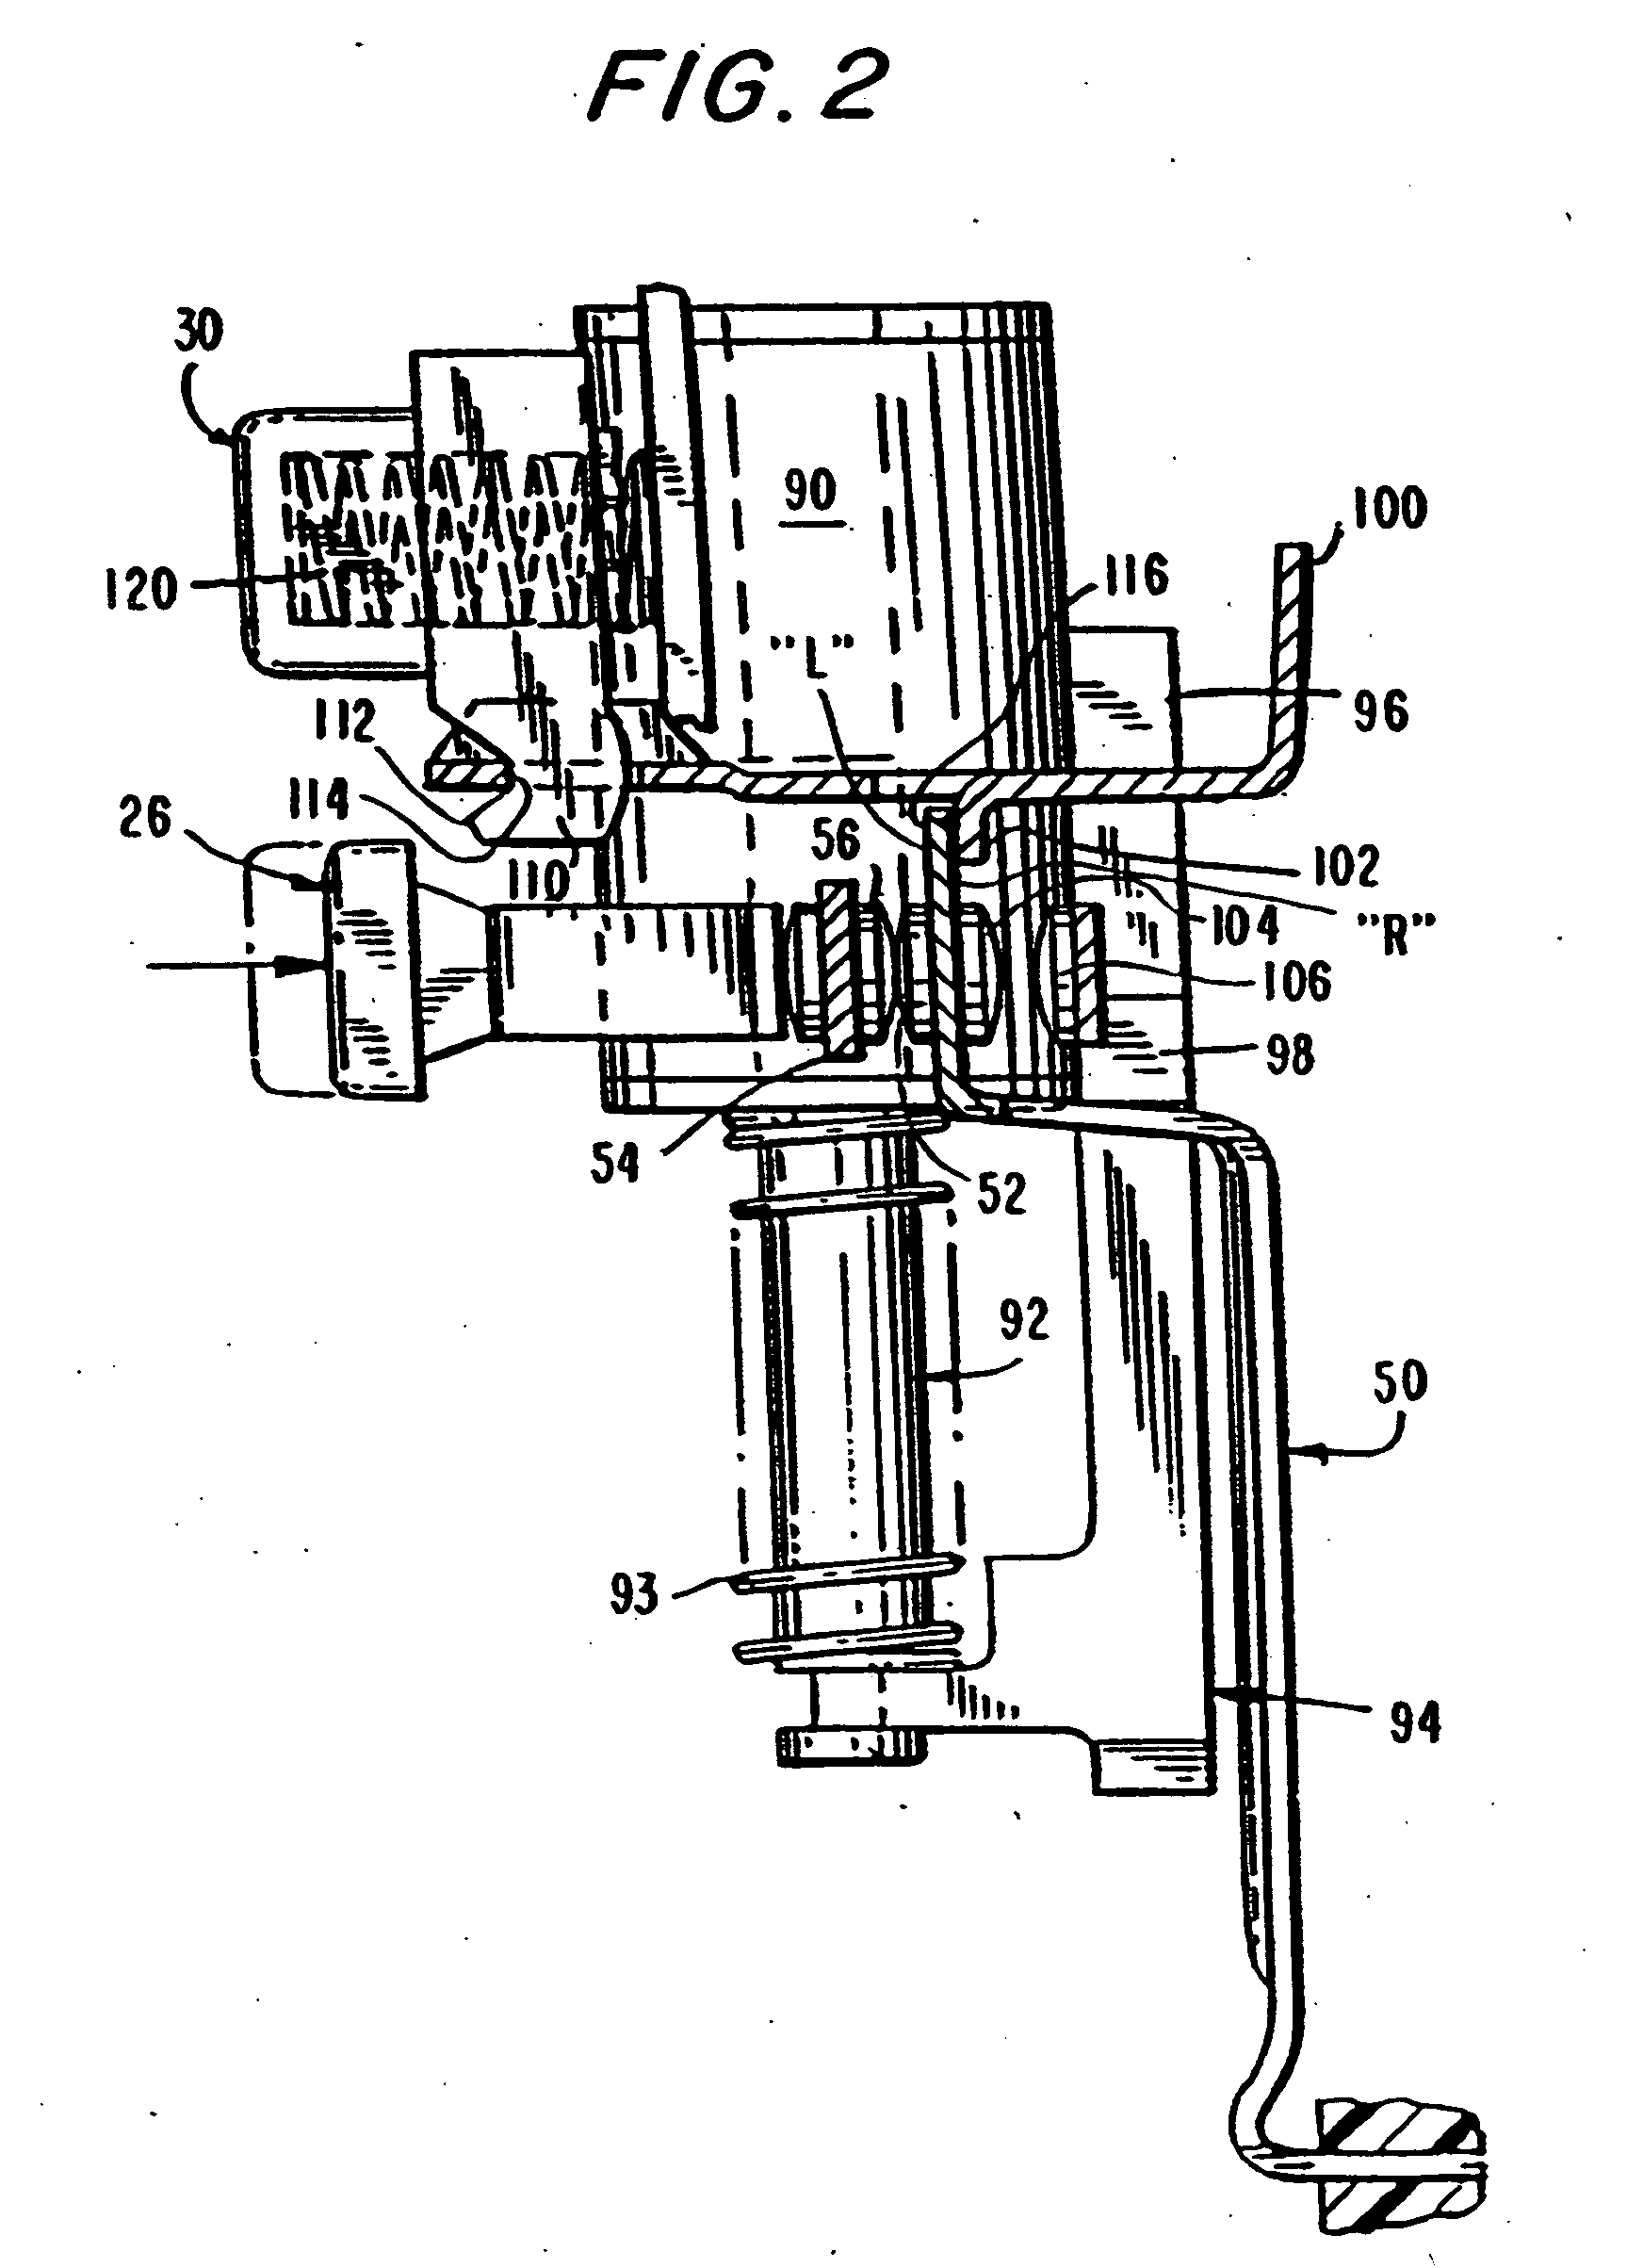 Circuit interrupting device with reverse wiring protection